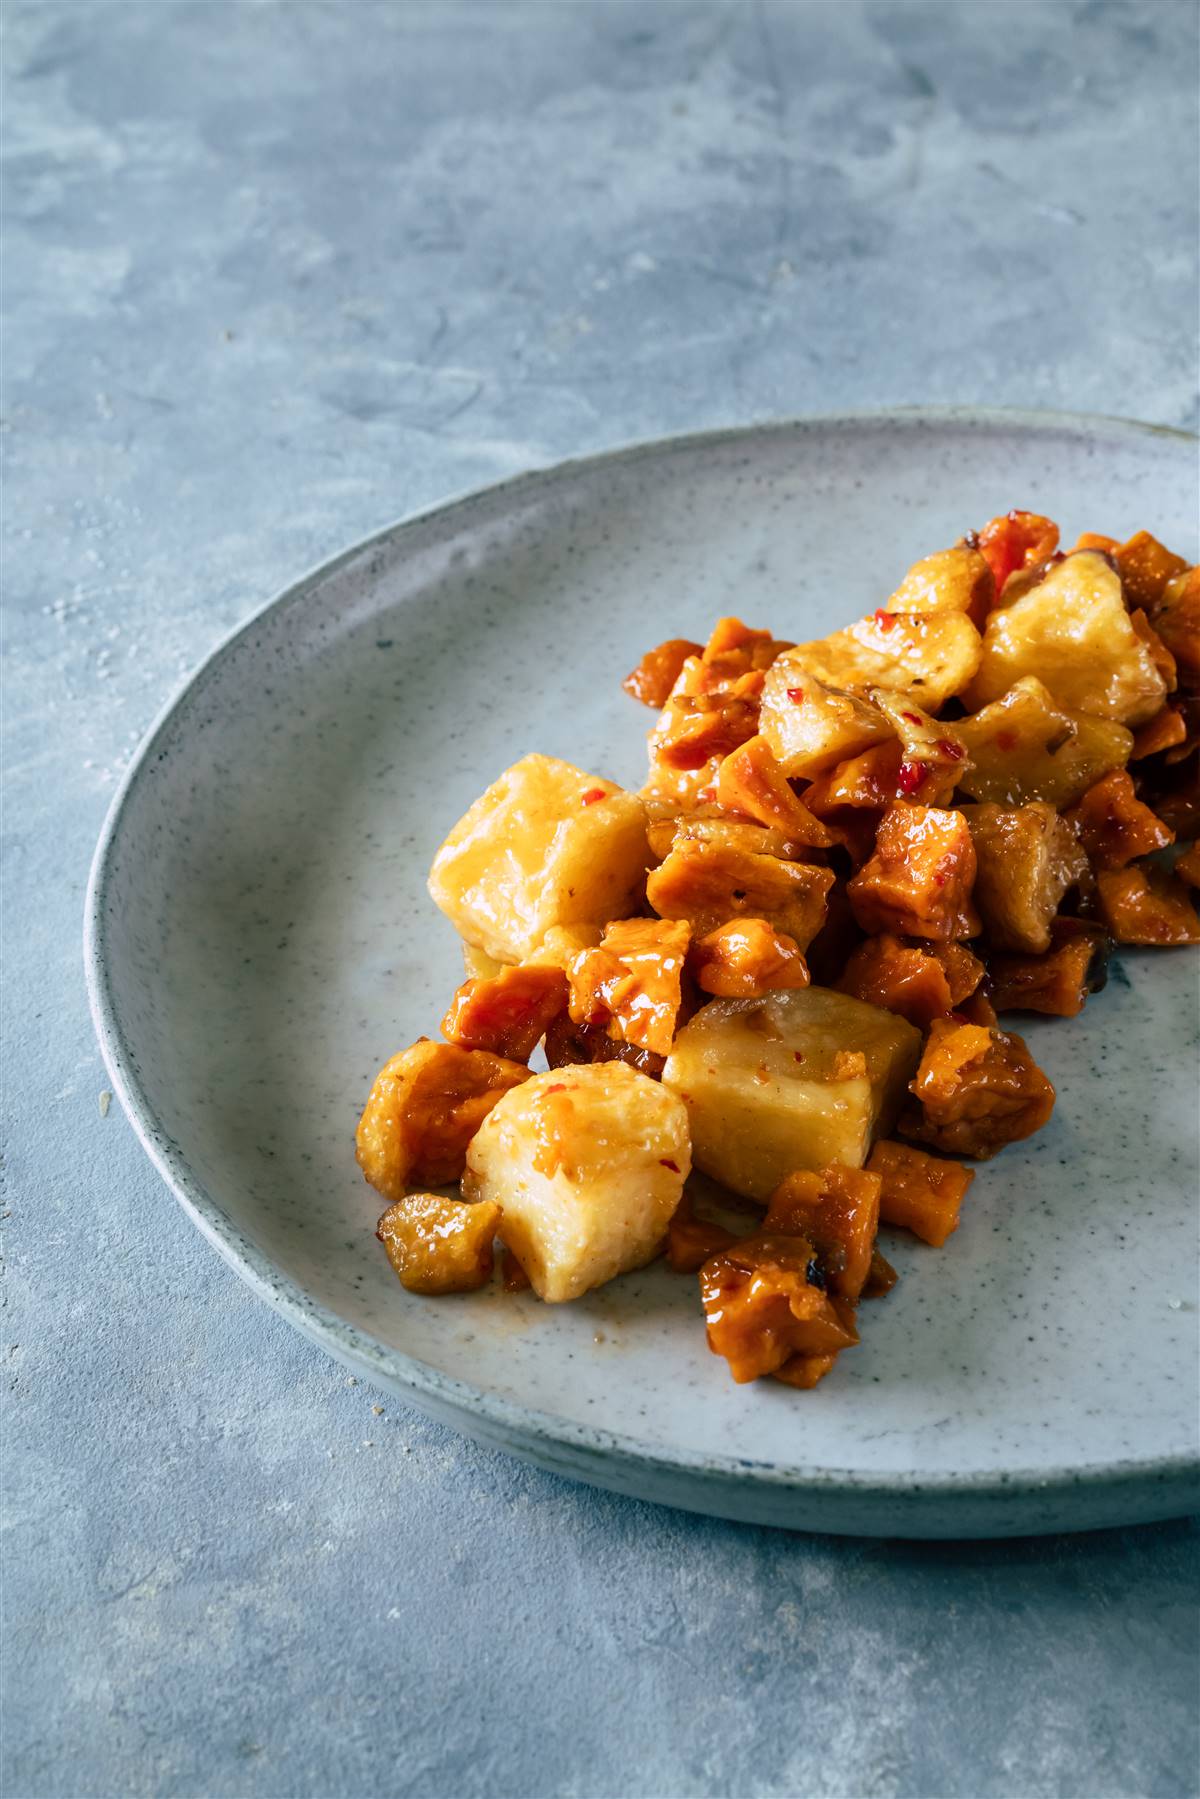 Cubed Potatoes and Sweet Potatoes in Chili